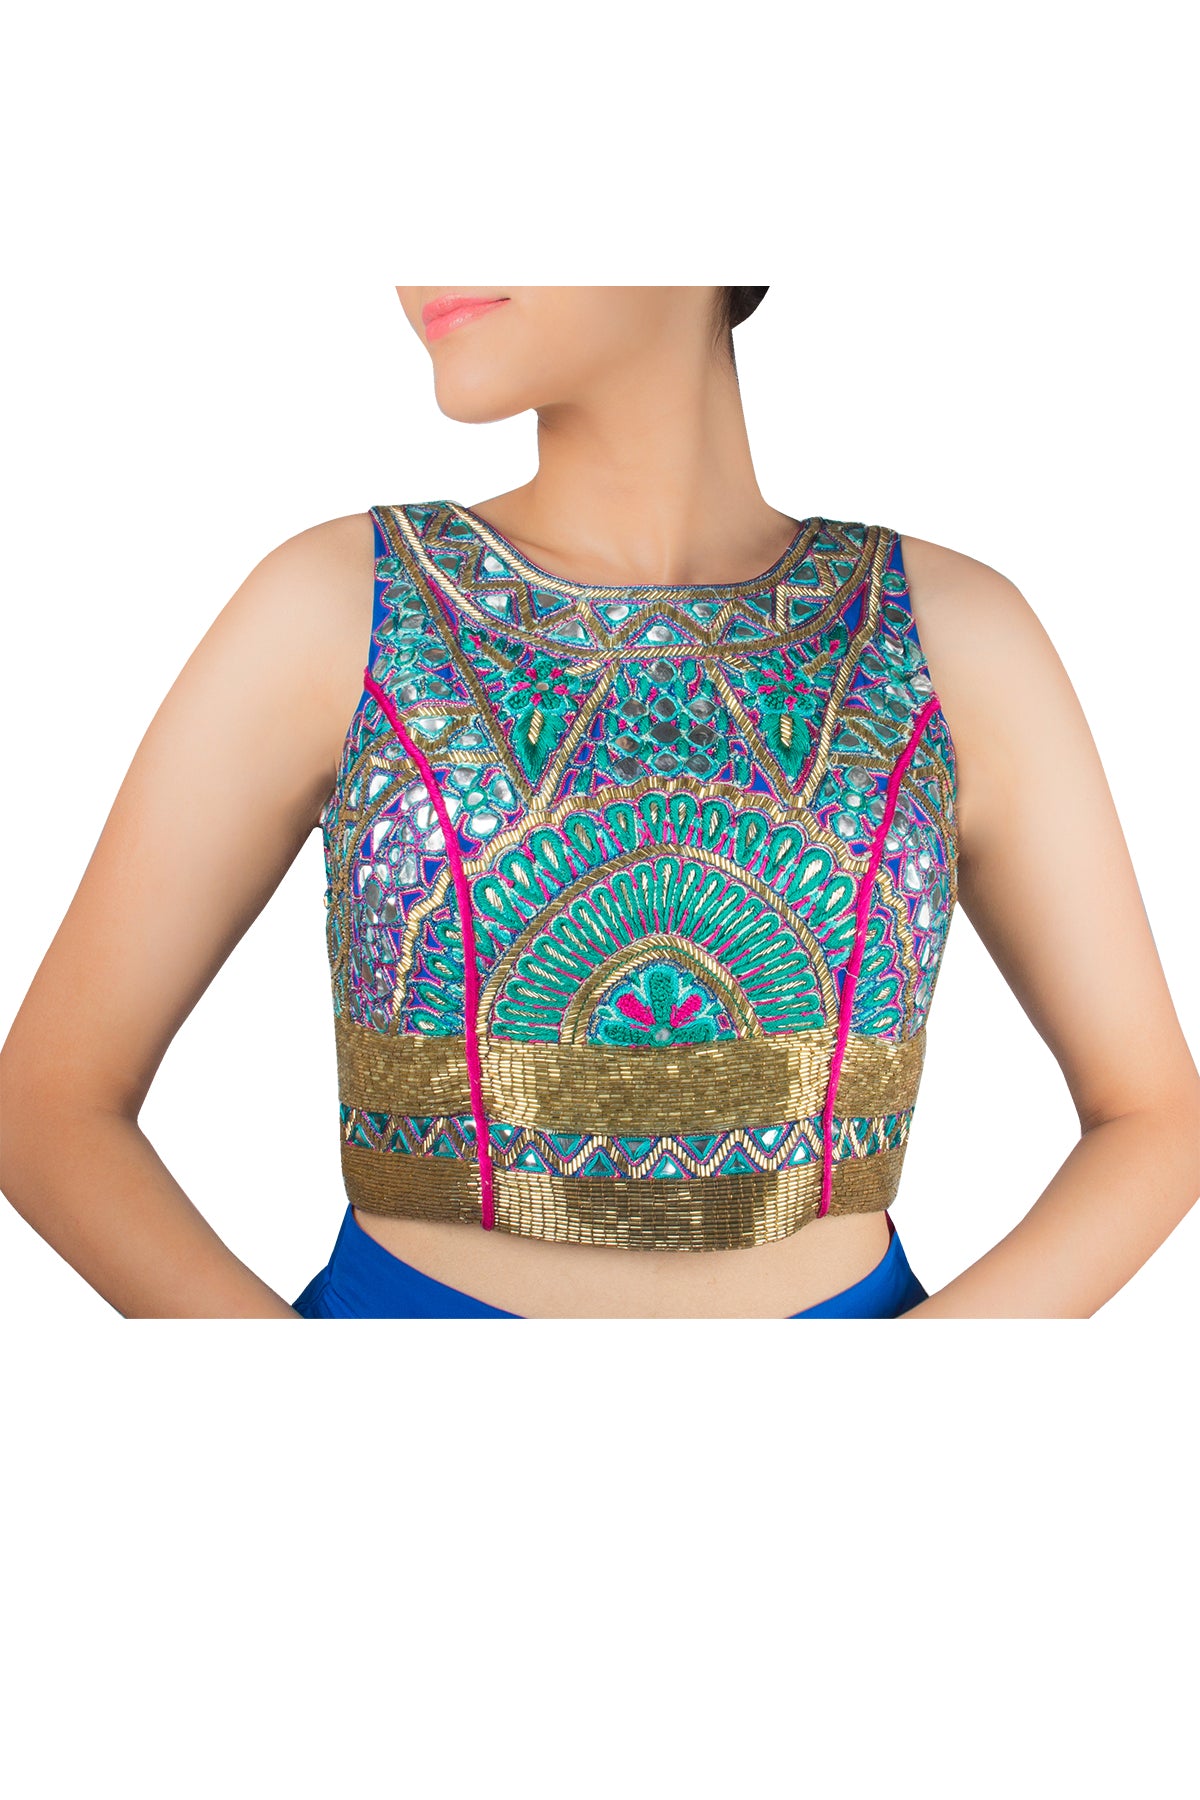 Peacock Mirror Crop Top and Blue Skirt